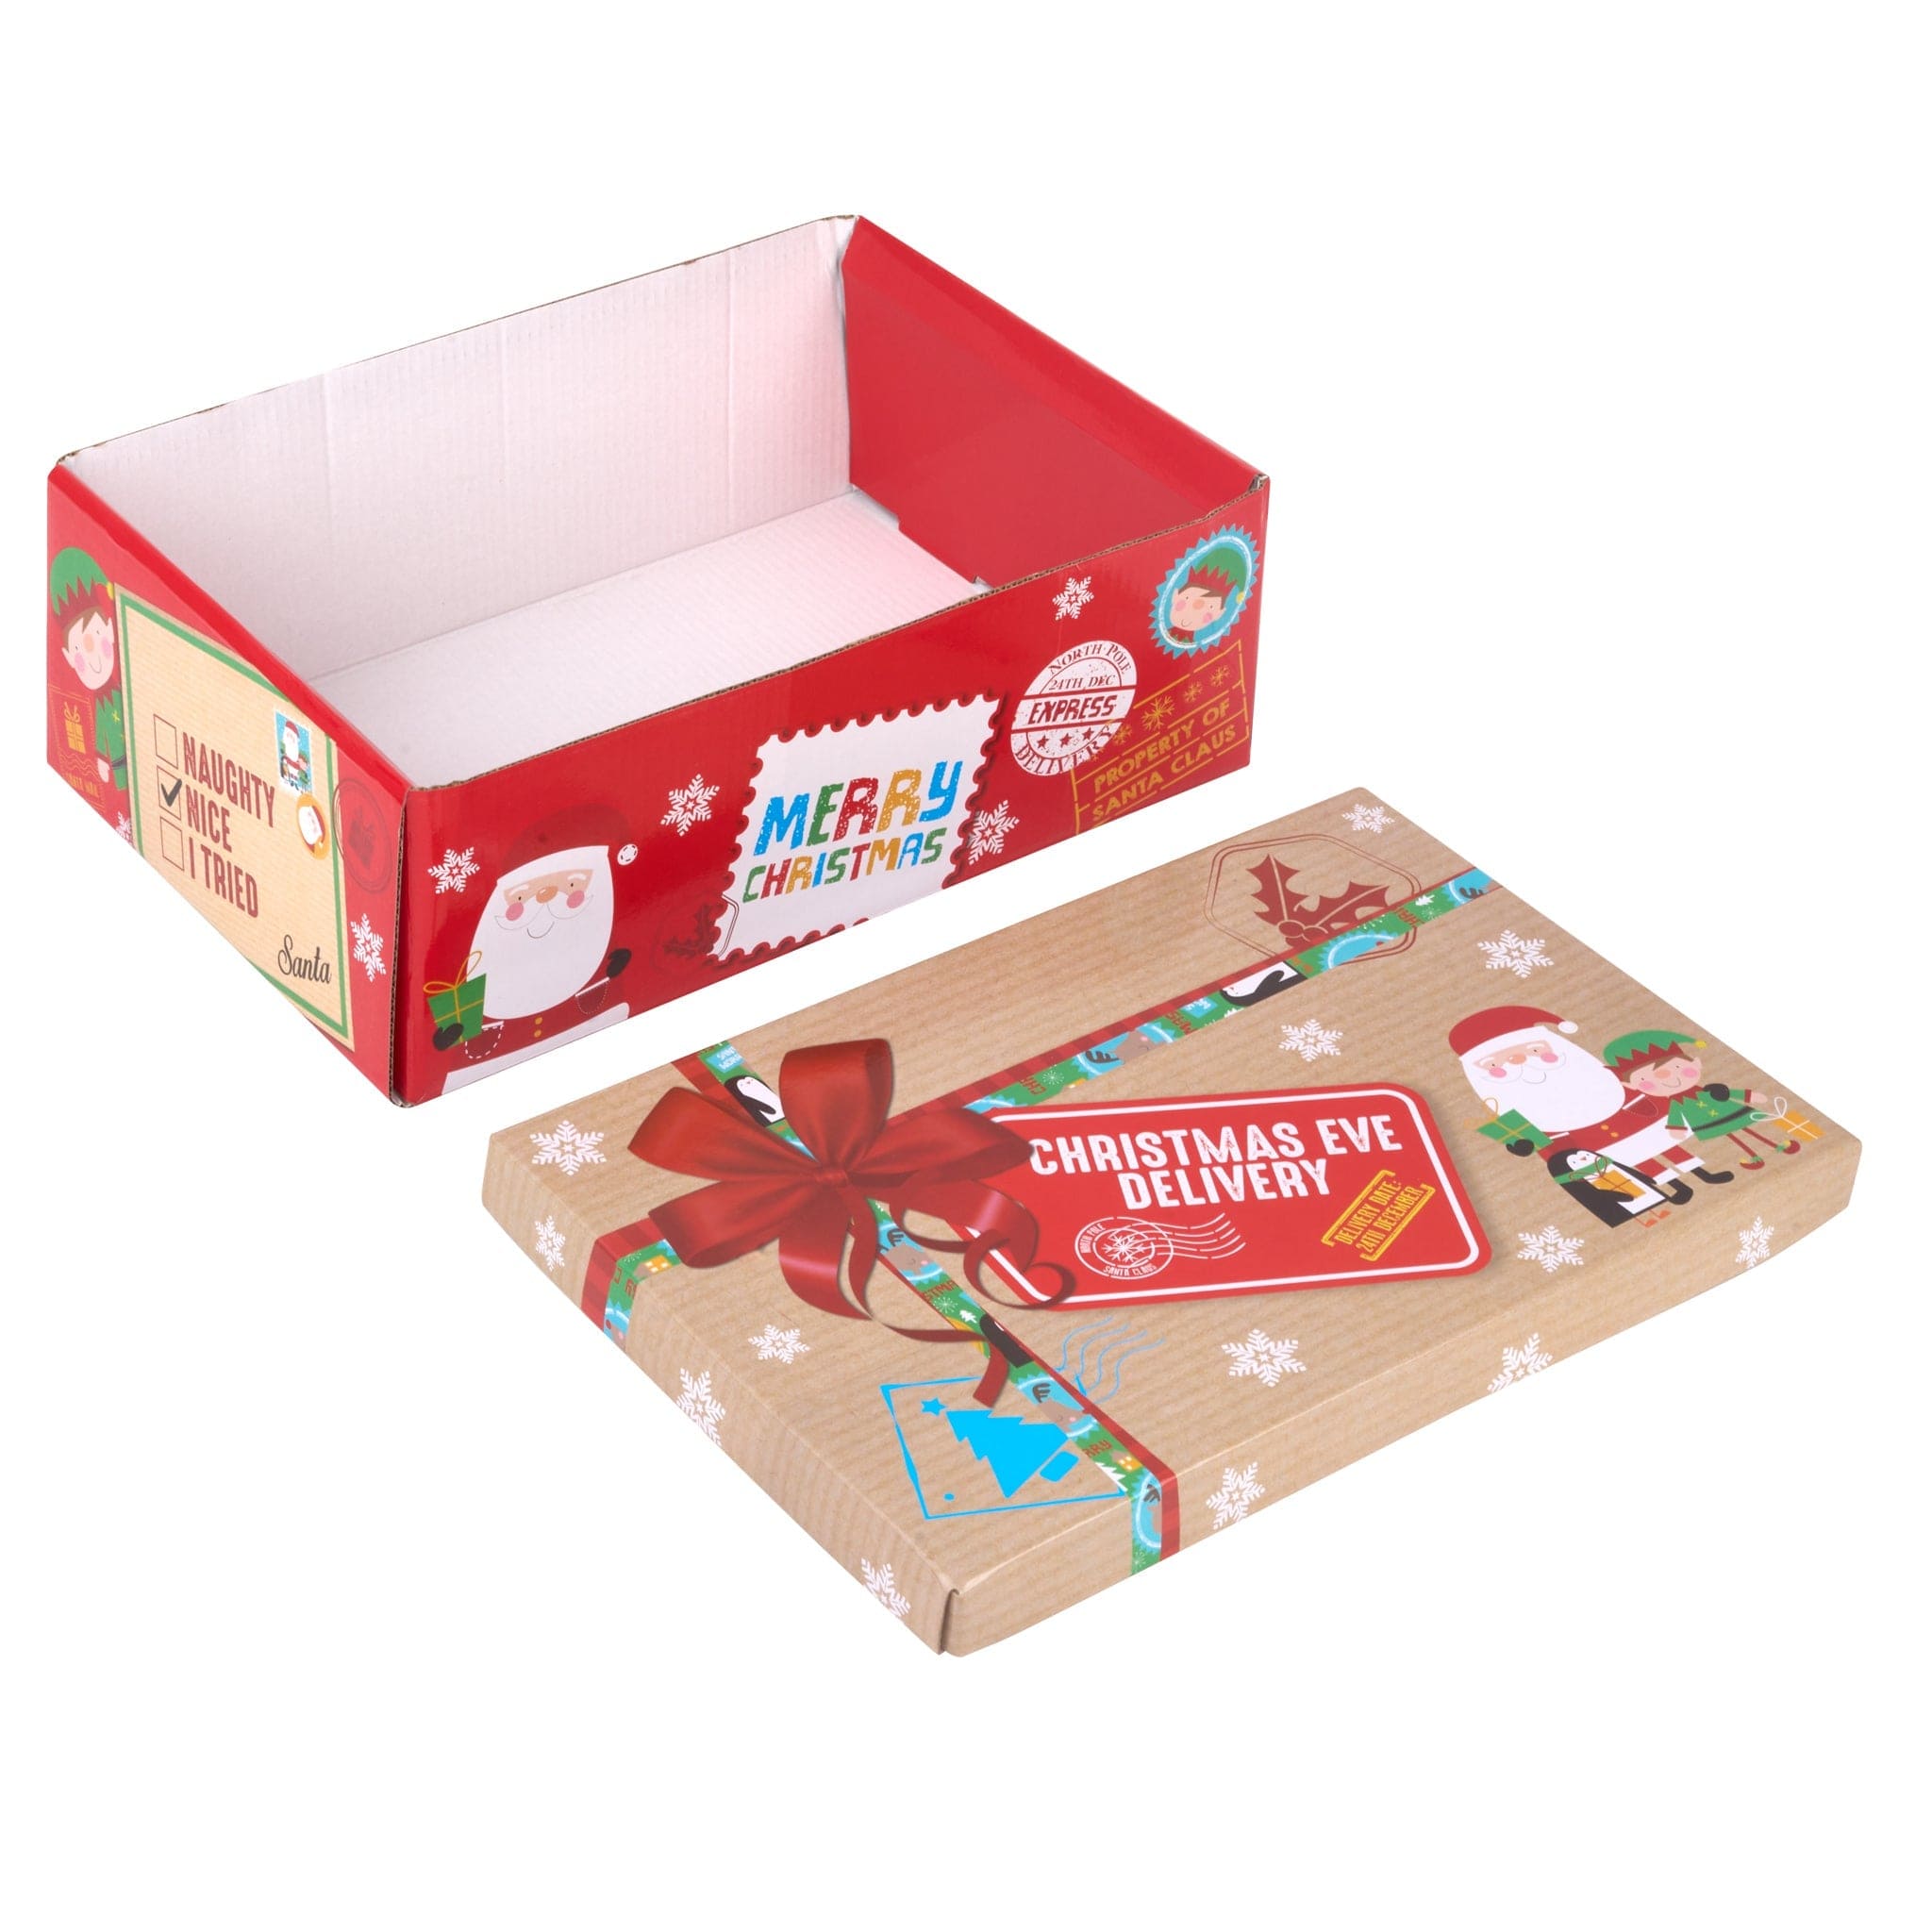 Wooden Effect Festive Parcel Christmas Eve Box - Assorted Sizes only5pounds-com